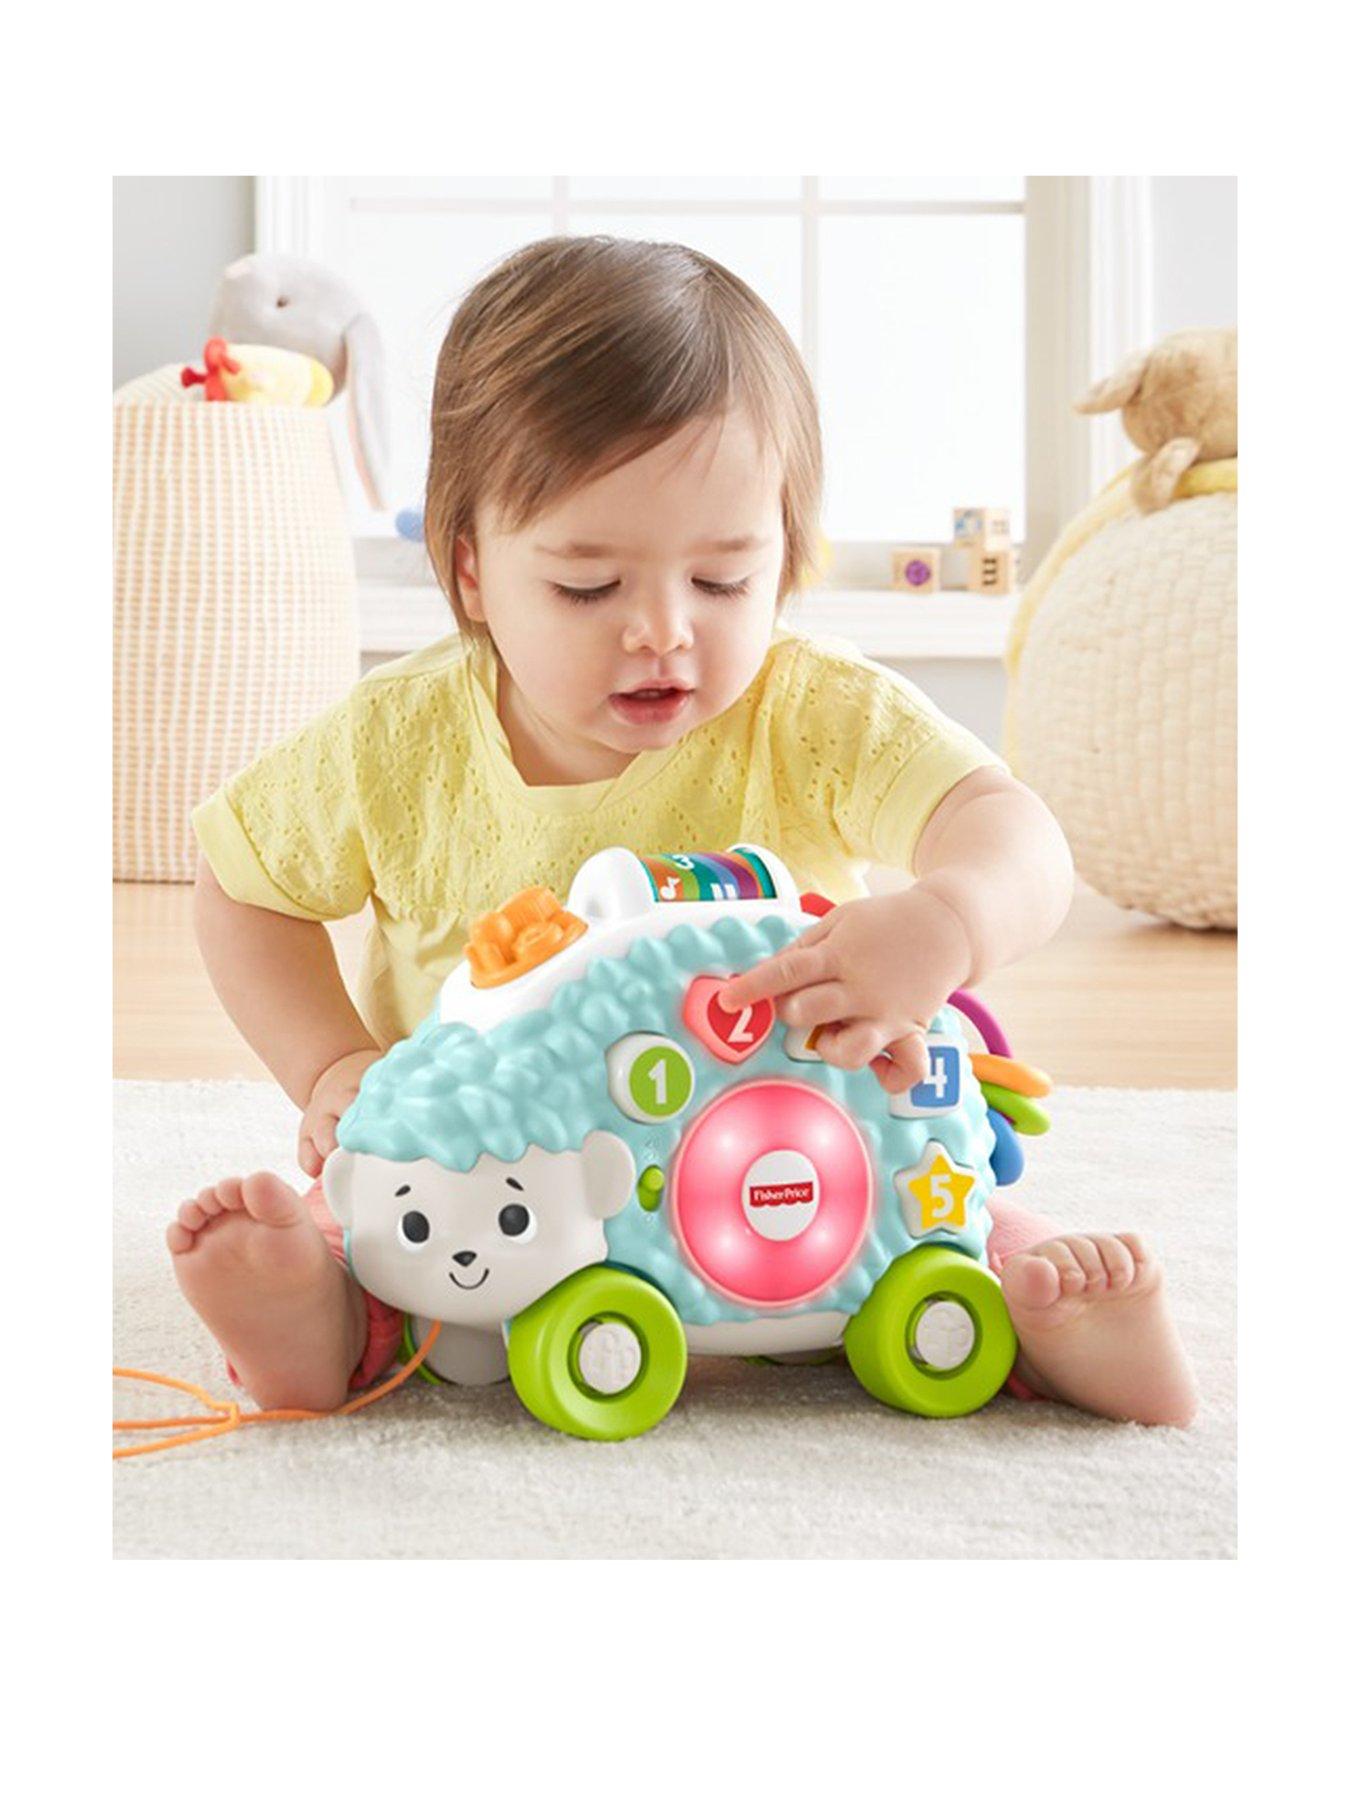 activity toys for toddlers